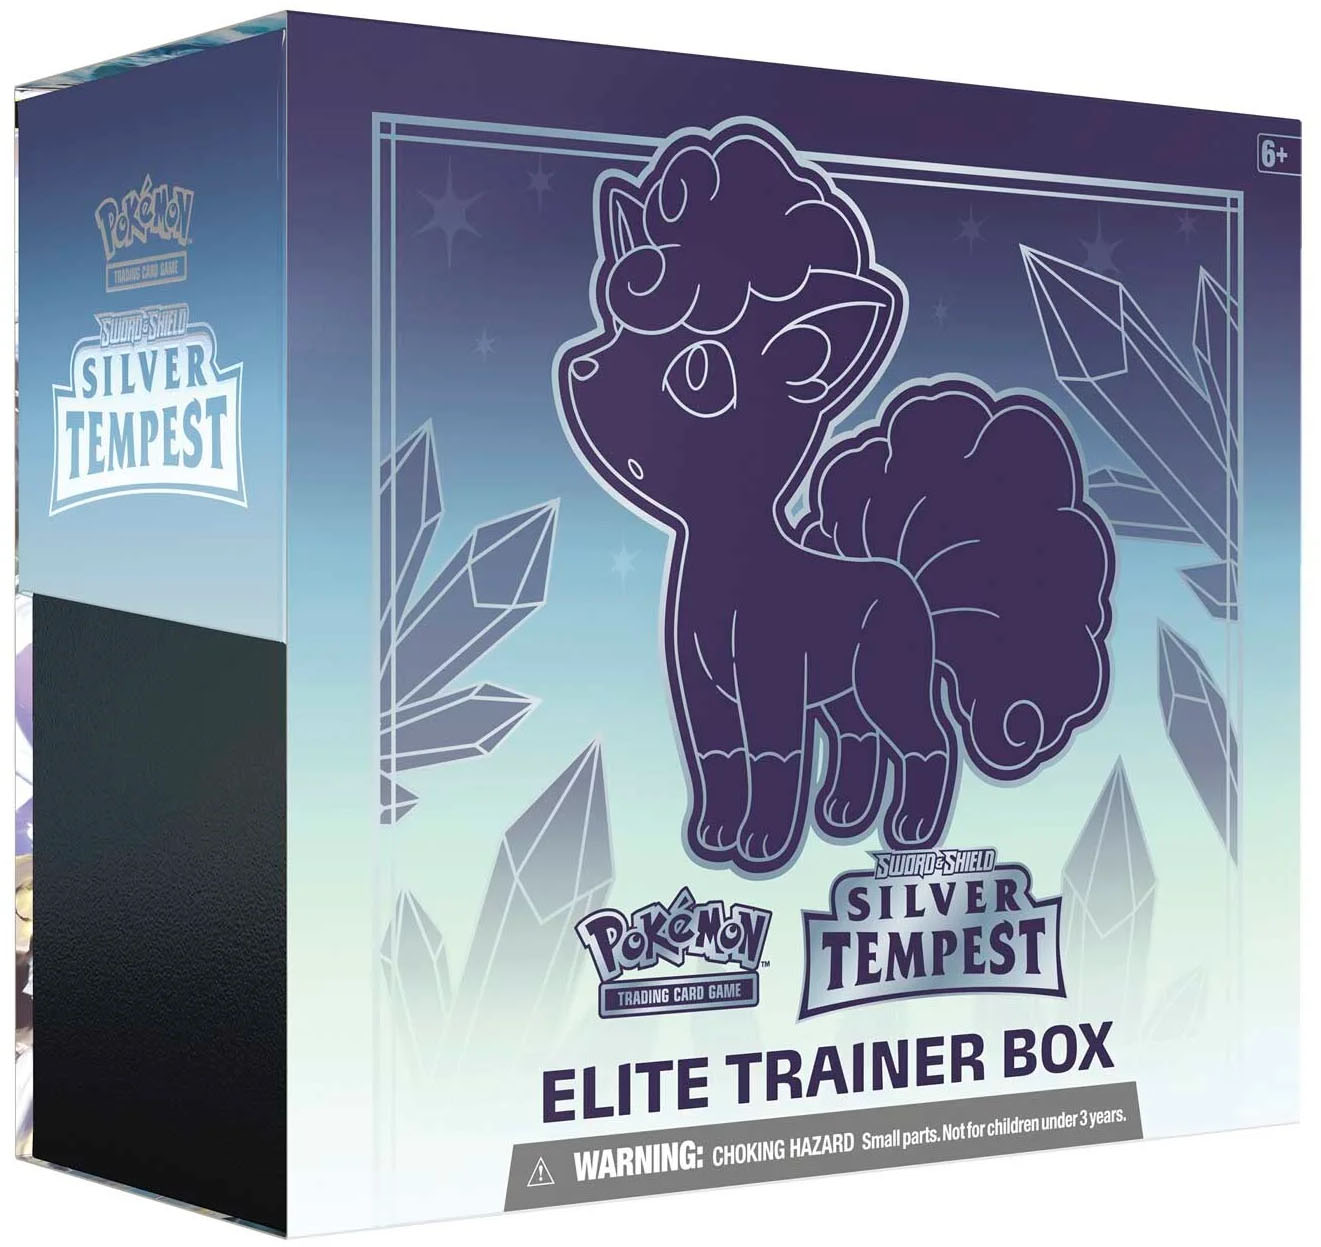 Silver Tempest" Product Images Revealed, Features Lugia VSTAR, Unown VSTAR,  and More! - | PokéBeach.com Forums